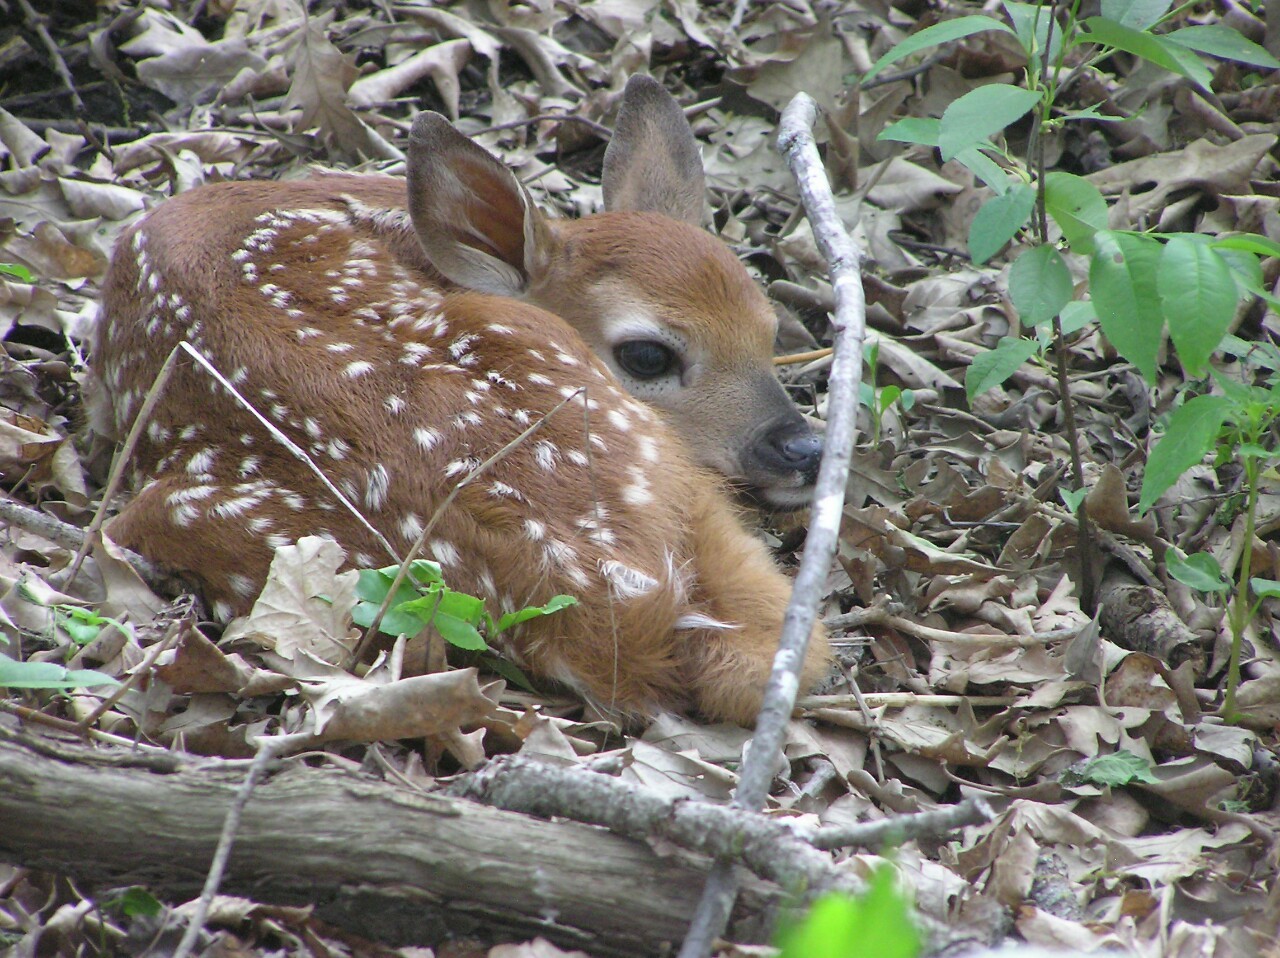 I met this little beauty a few years ago out in the woods.  Mommy deer was out eating